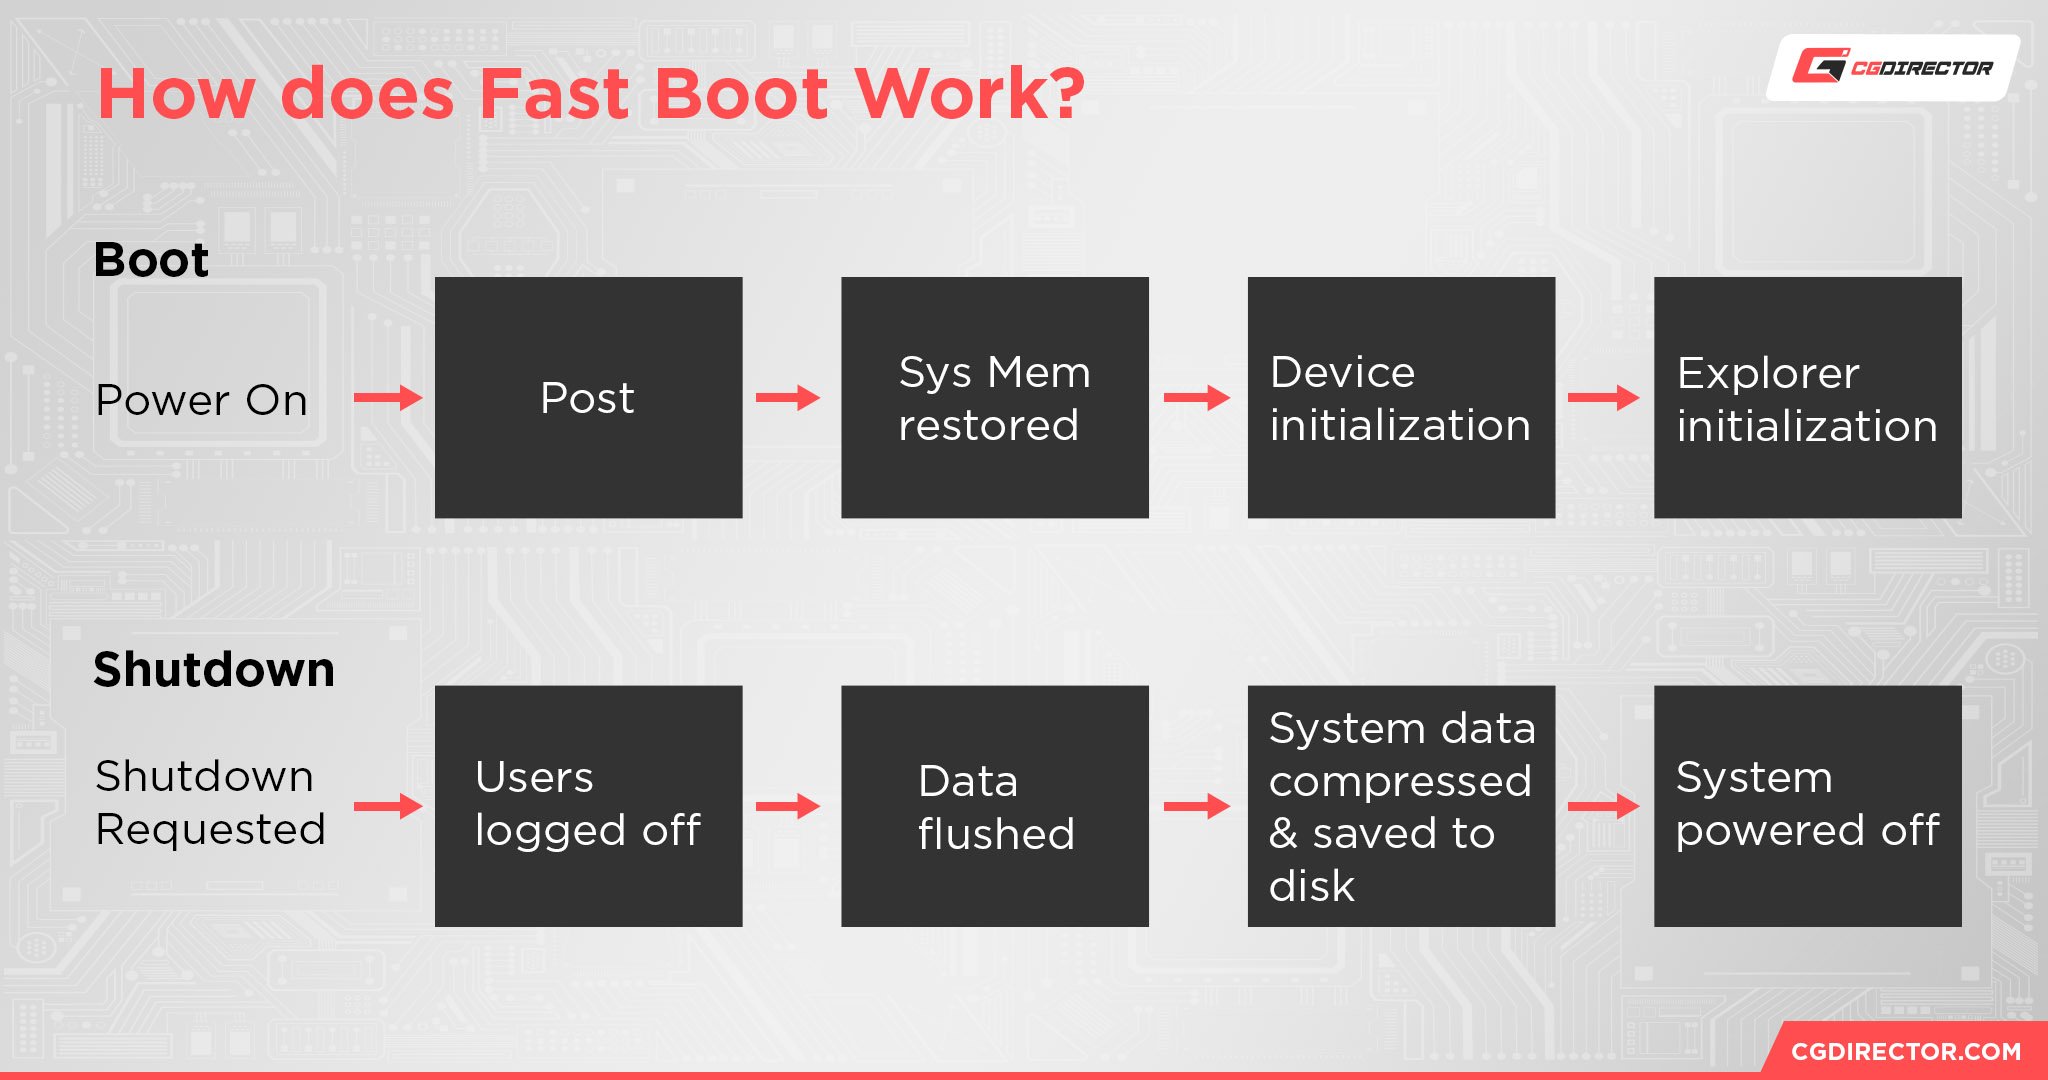 How does Fast Boot Work